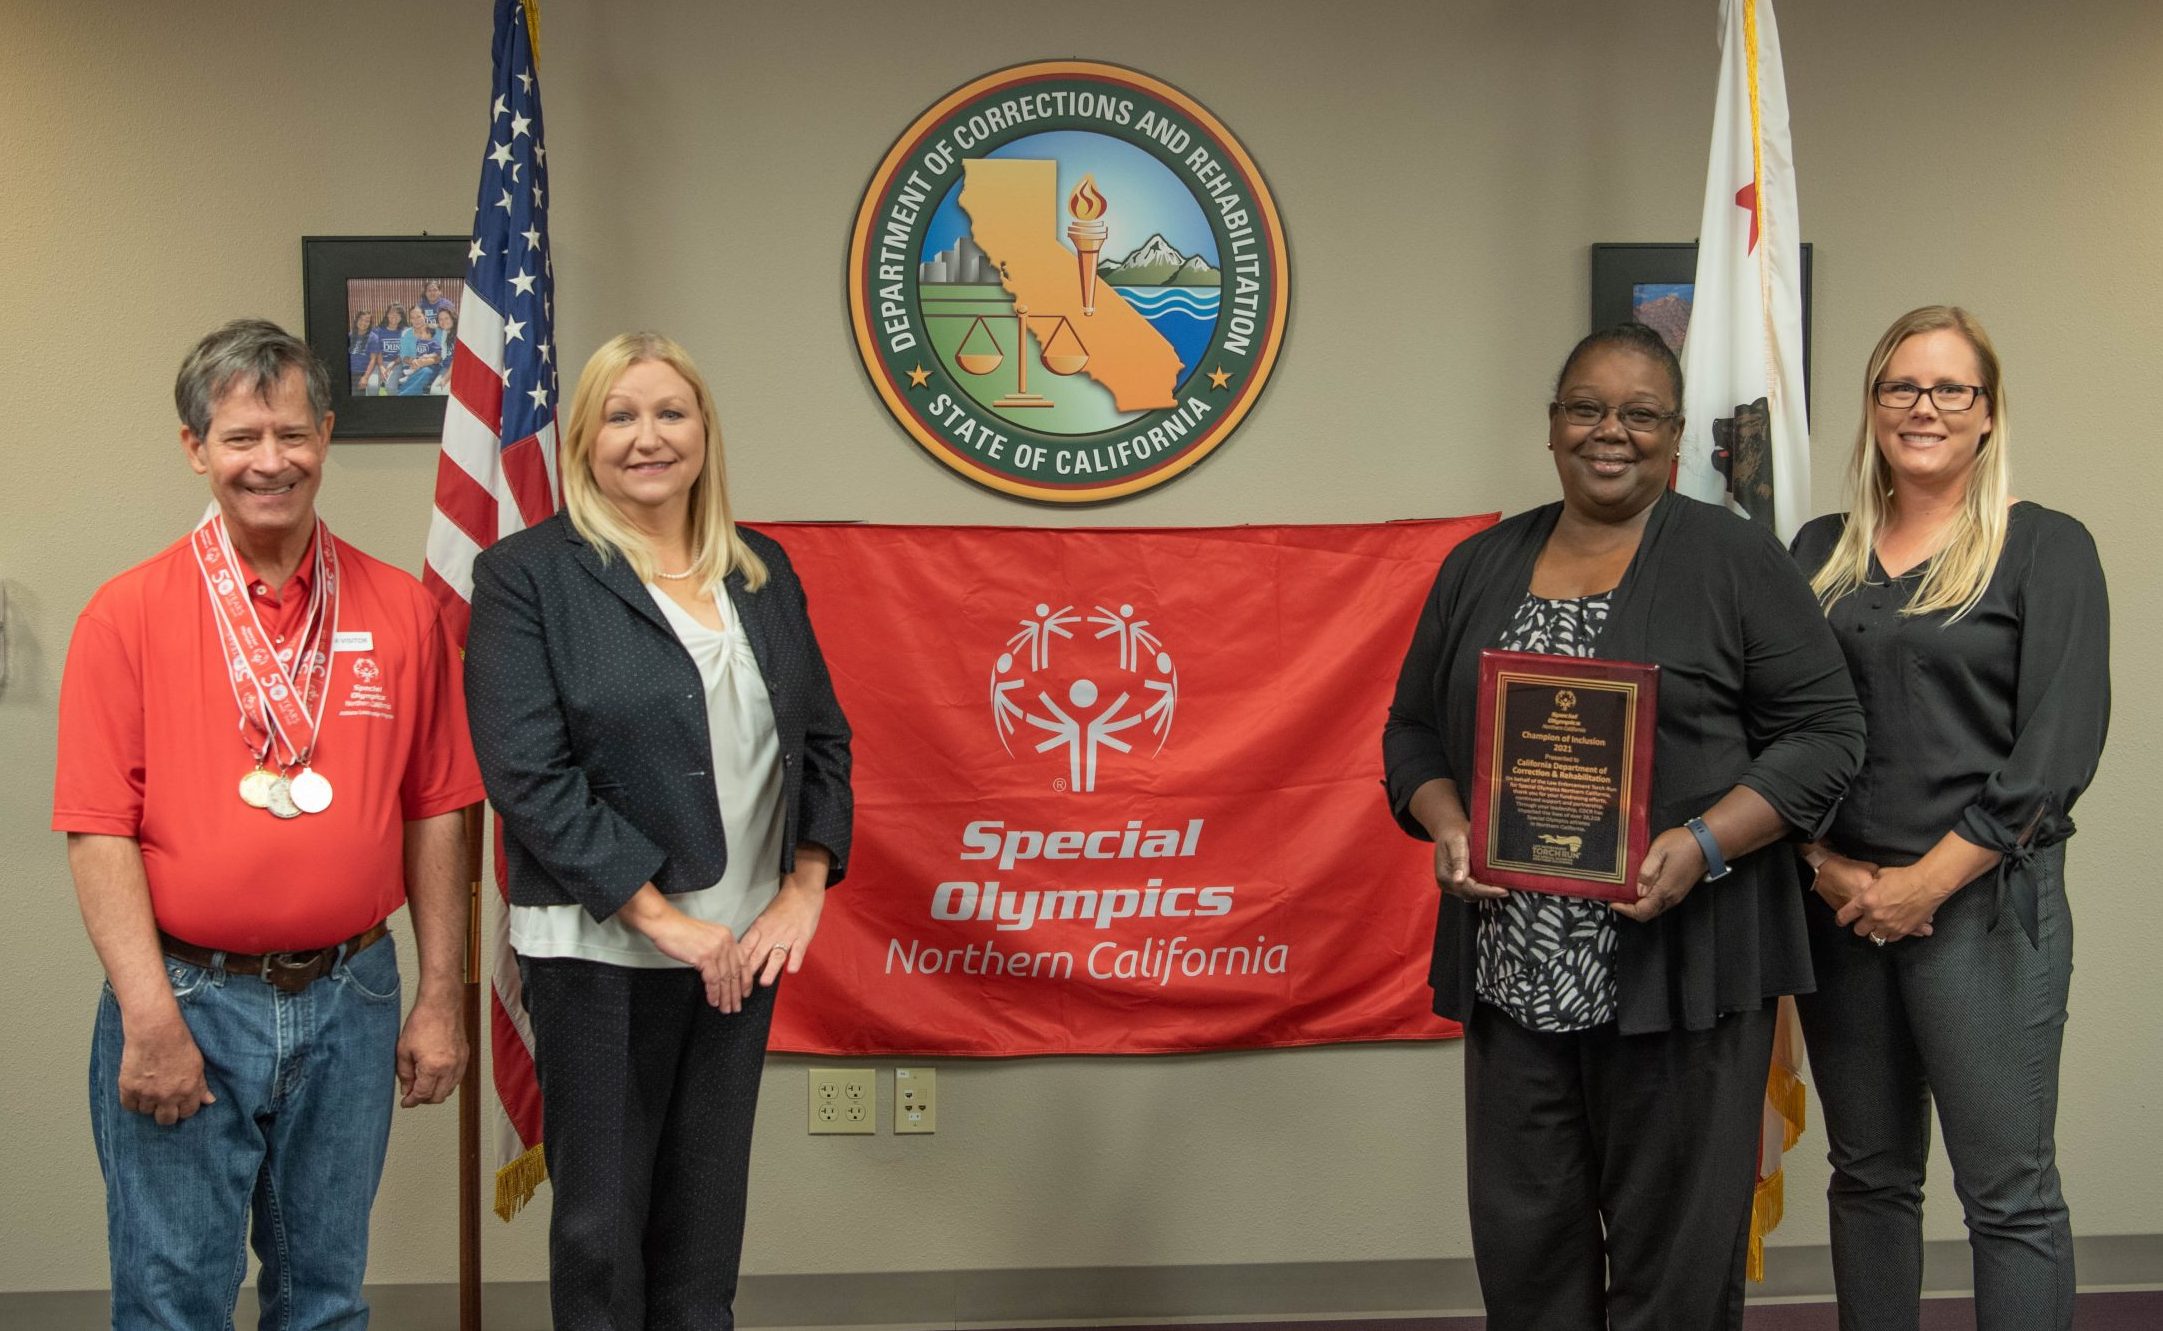 CDCR shows support for Special Olympics with headquarters presentation.